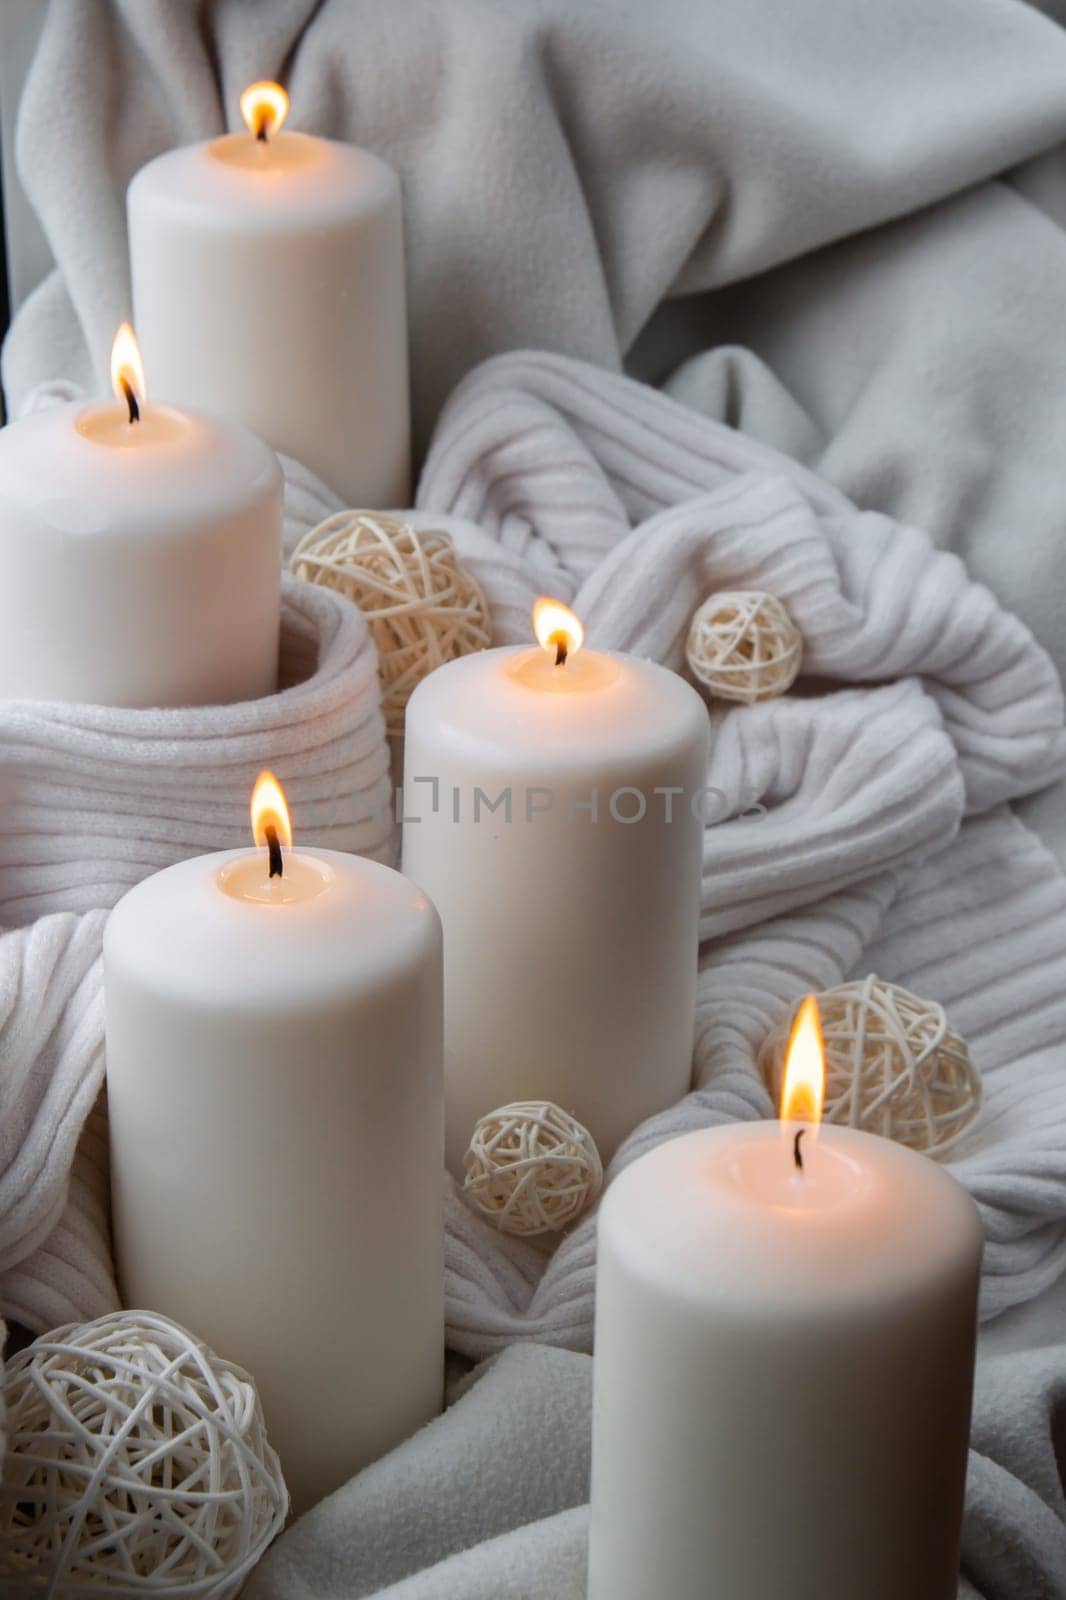 Home fragnance concept autumn holidays at cozy home on the windowsill Hygge aesthetic atmosphere on knitted white sweater. Still life of micro moment candid slow living. Mental health wellbeing exercises Raining Outside